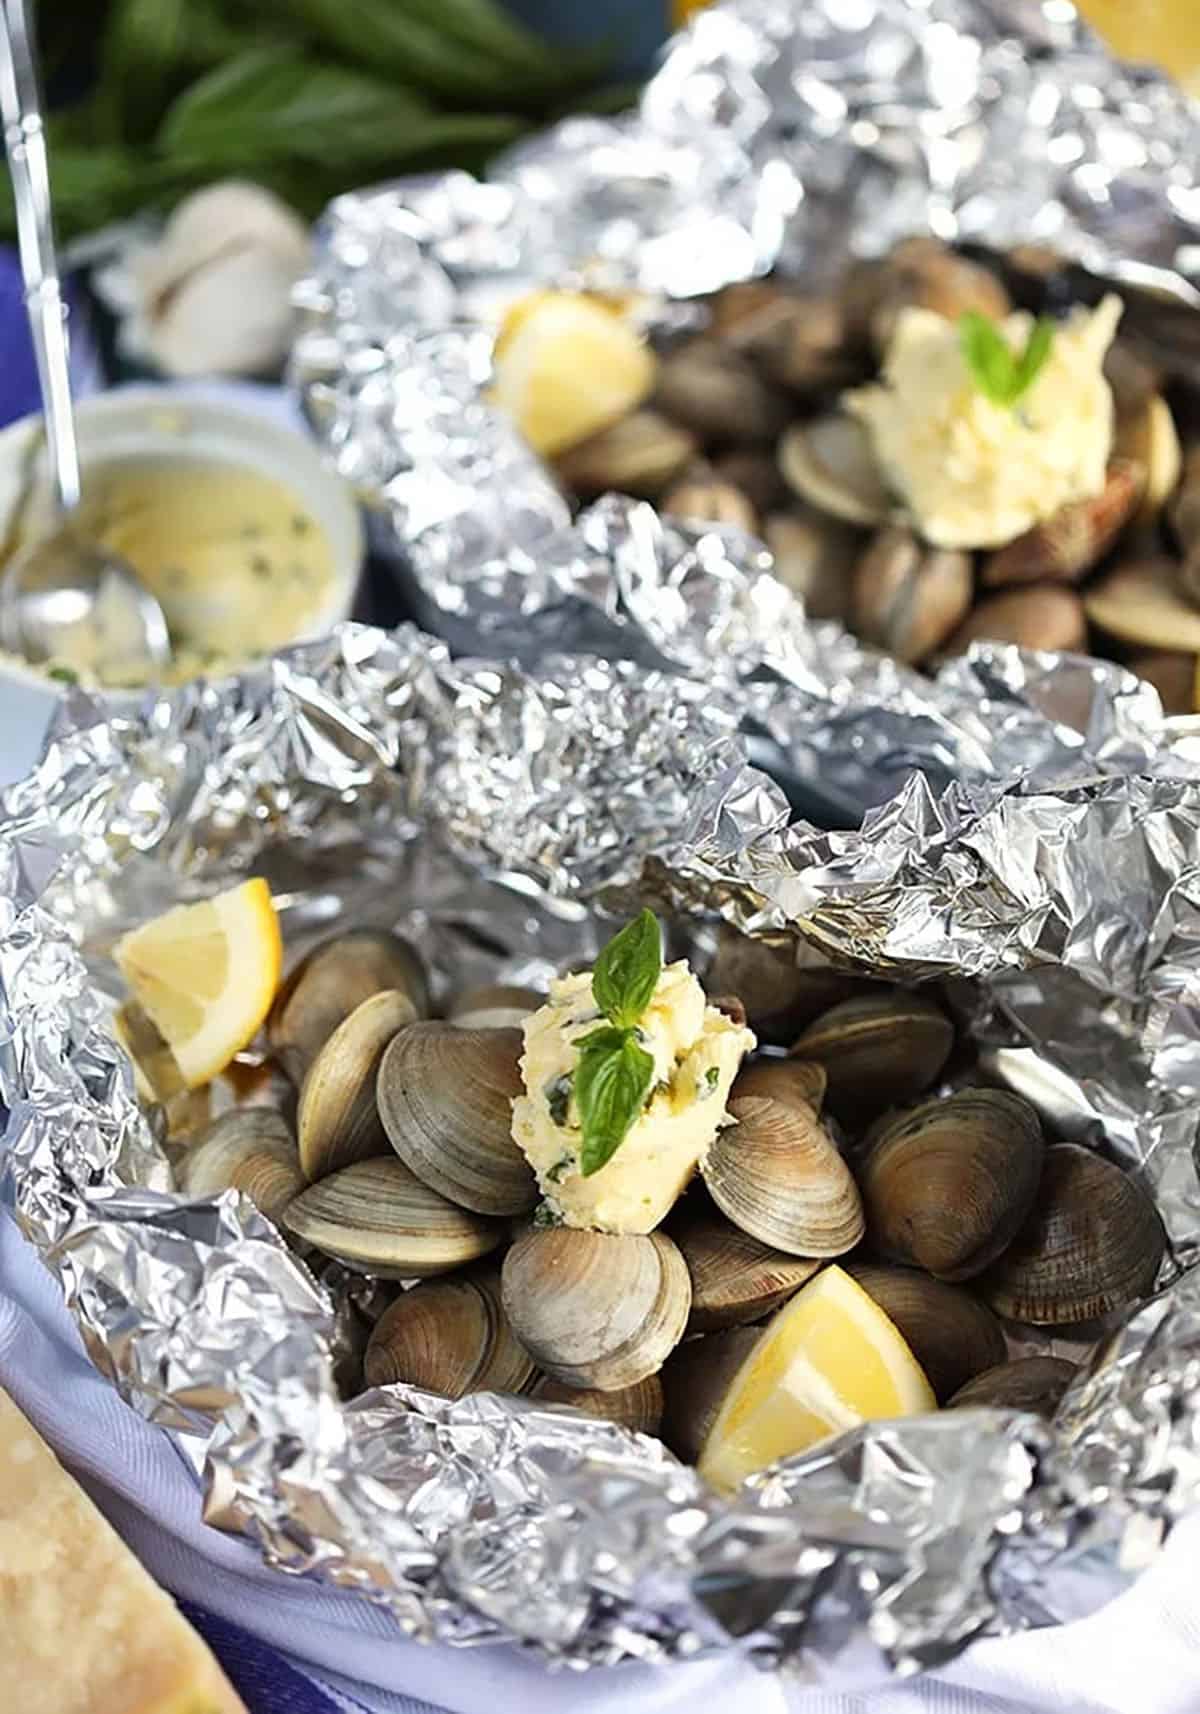 Clams in foil with compound butter.